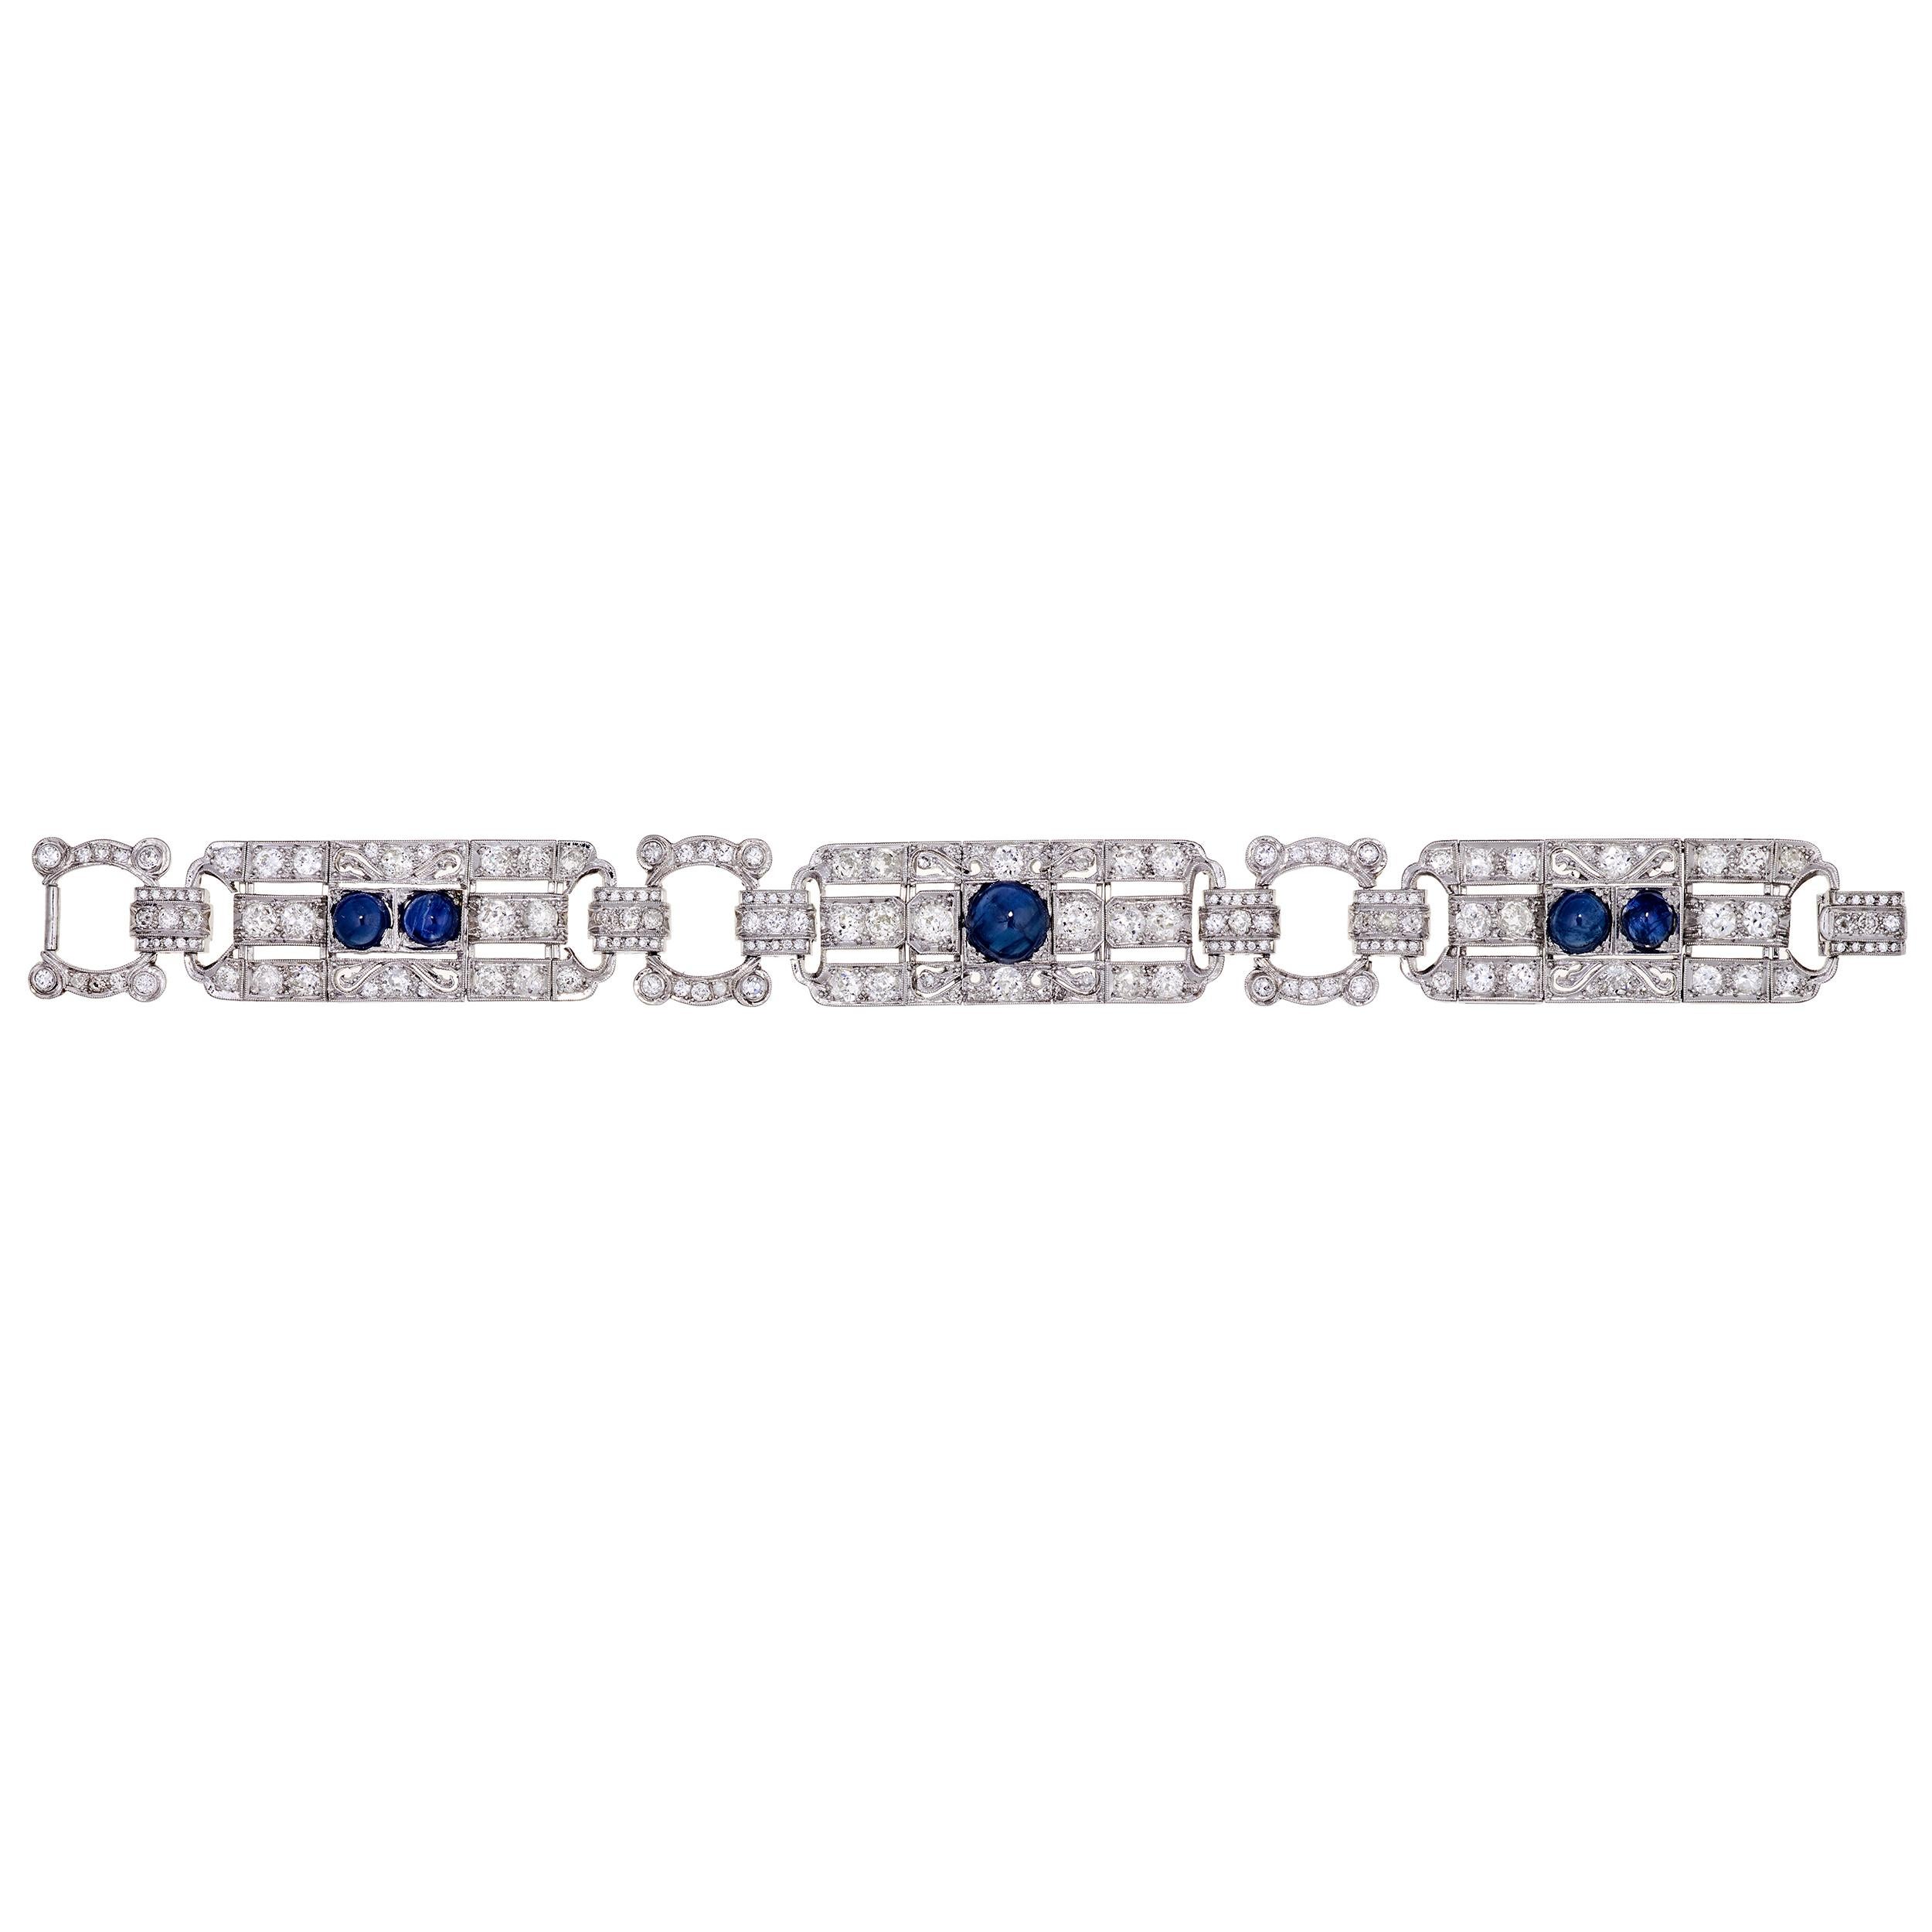 A gorgeous example of classic Art Deco work.  This stunning bracelet works just as well with jeans as it does with an evening gown.  This bracelet features 3 large sections, the center section featuring a single large round Sapphire Cabochon, and